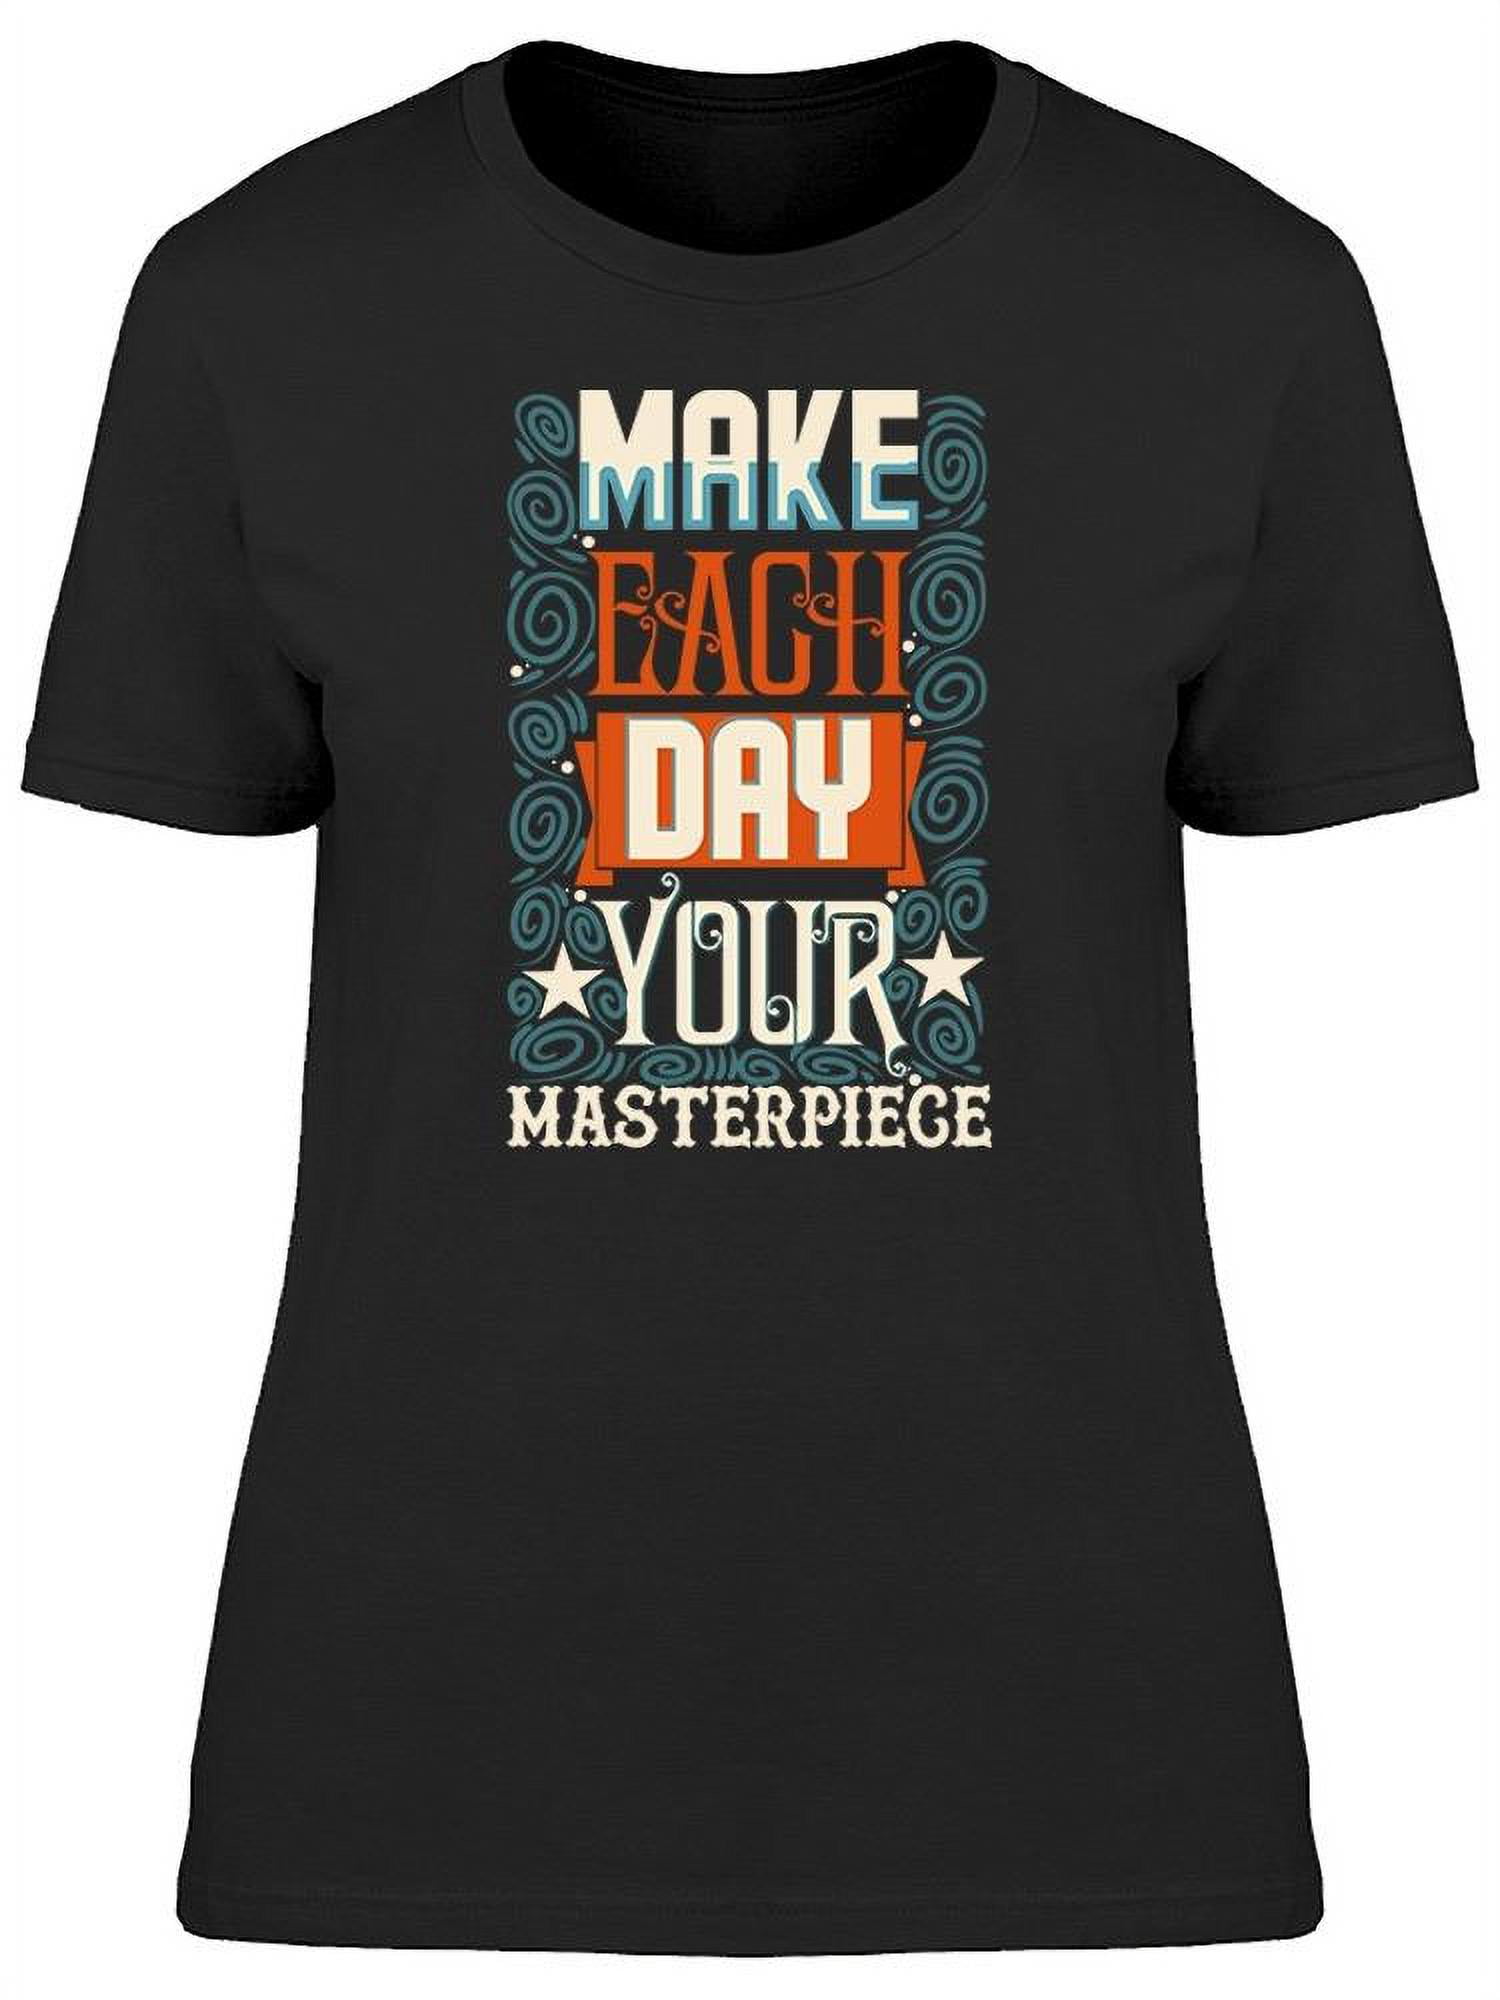 Inspirational Quotes for Women Make Each Day Your Masterpiece t-shirt S-3XL 